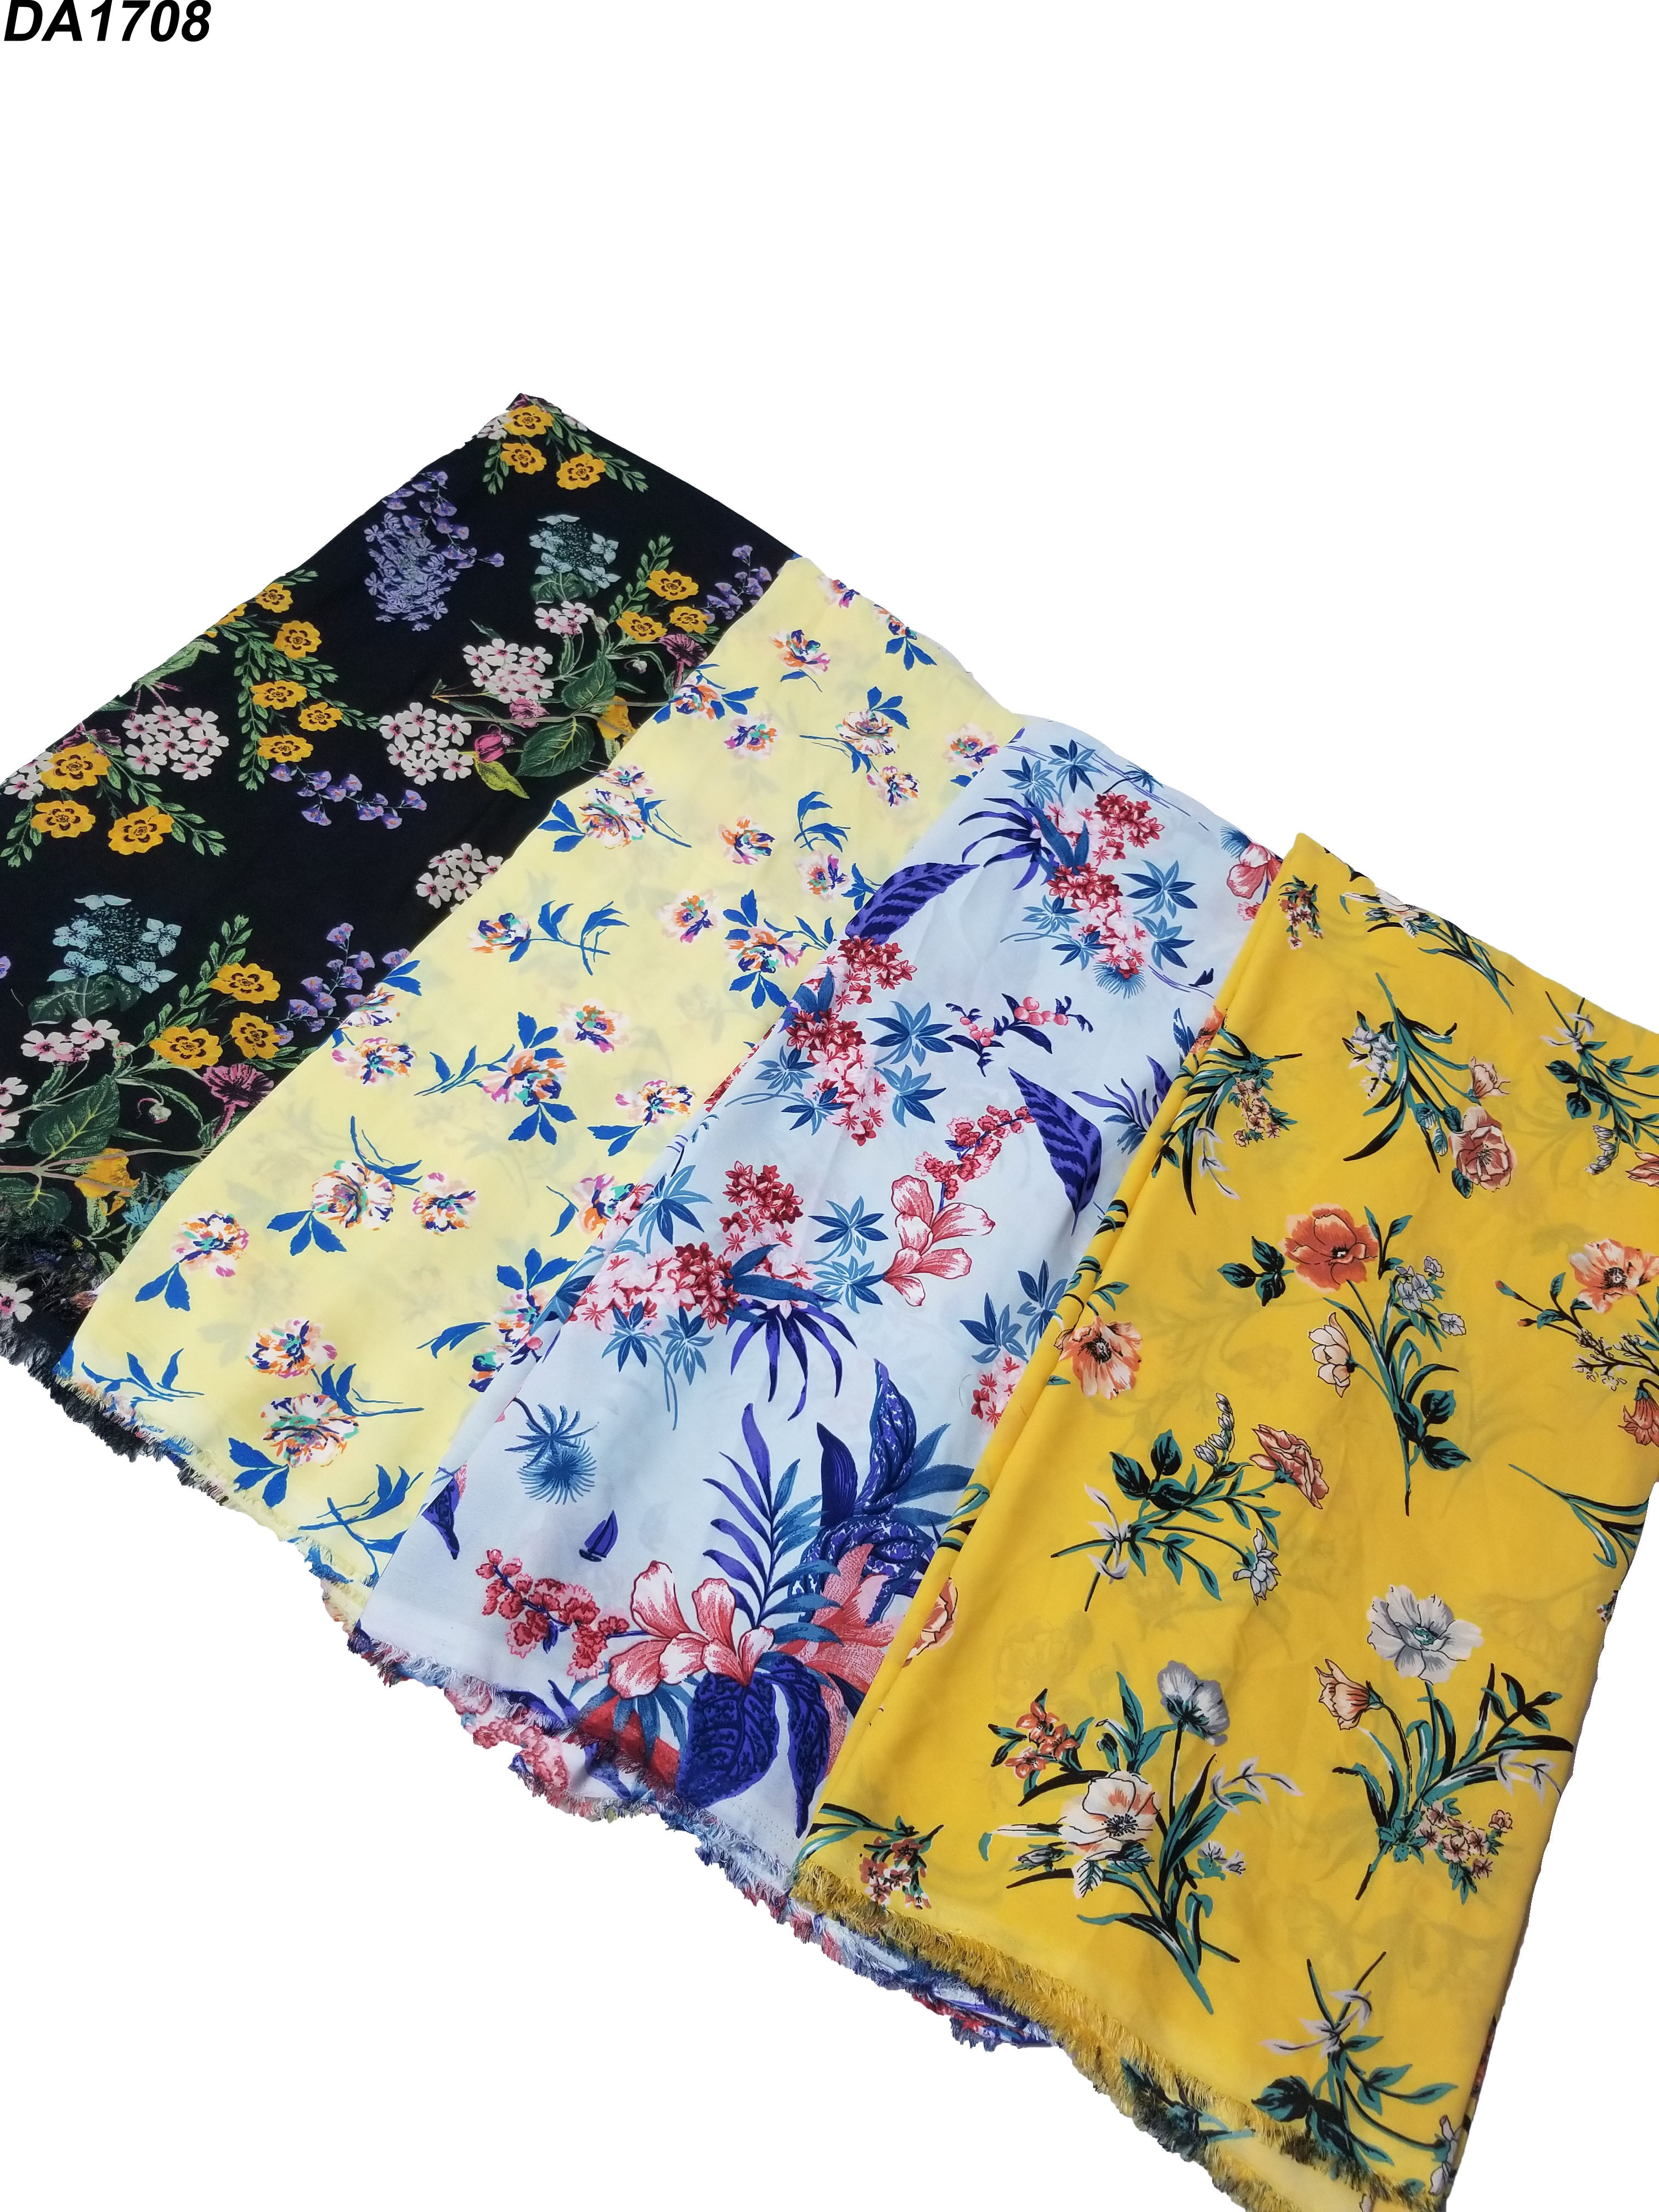 DeeArna Export's Floral Digital Print Export Georgette (TEX x TEX 765) Unstitch Fancy Fabric Material for Women's Clothing (60